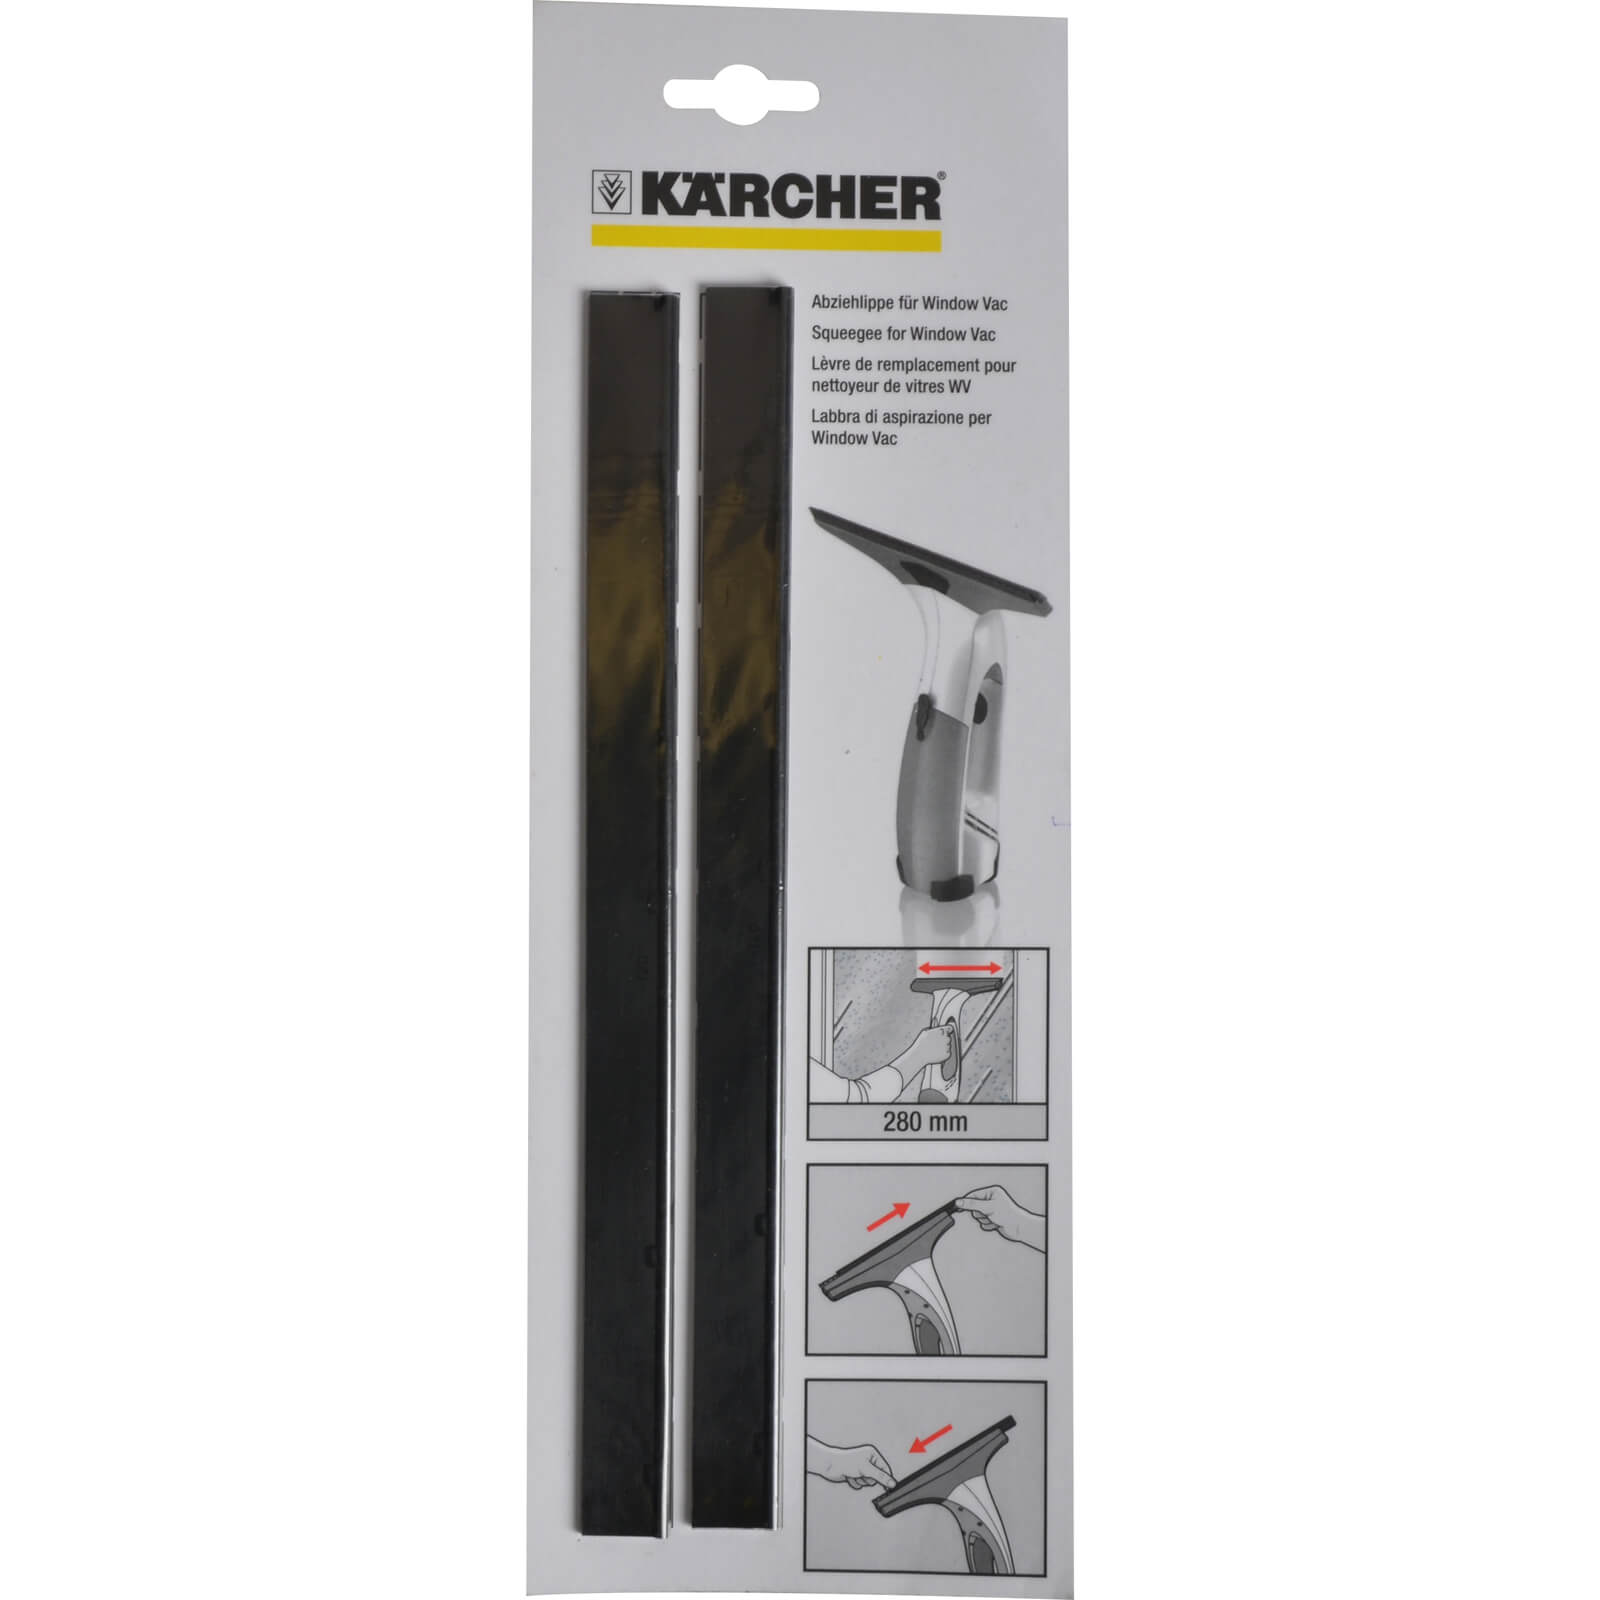 Karcher Replacement Squeegee Blades 280mm for Karcher Window Vac Pack of 2